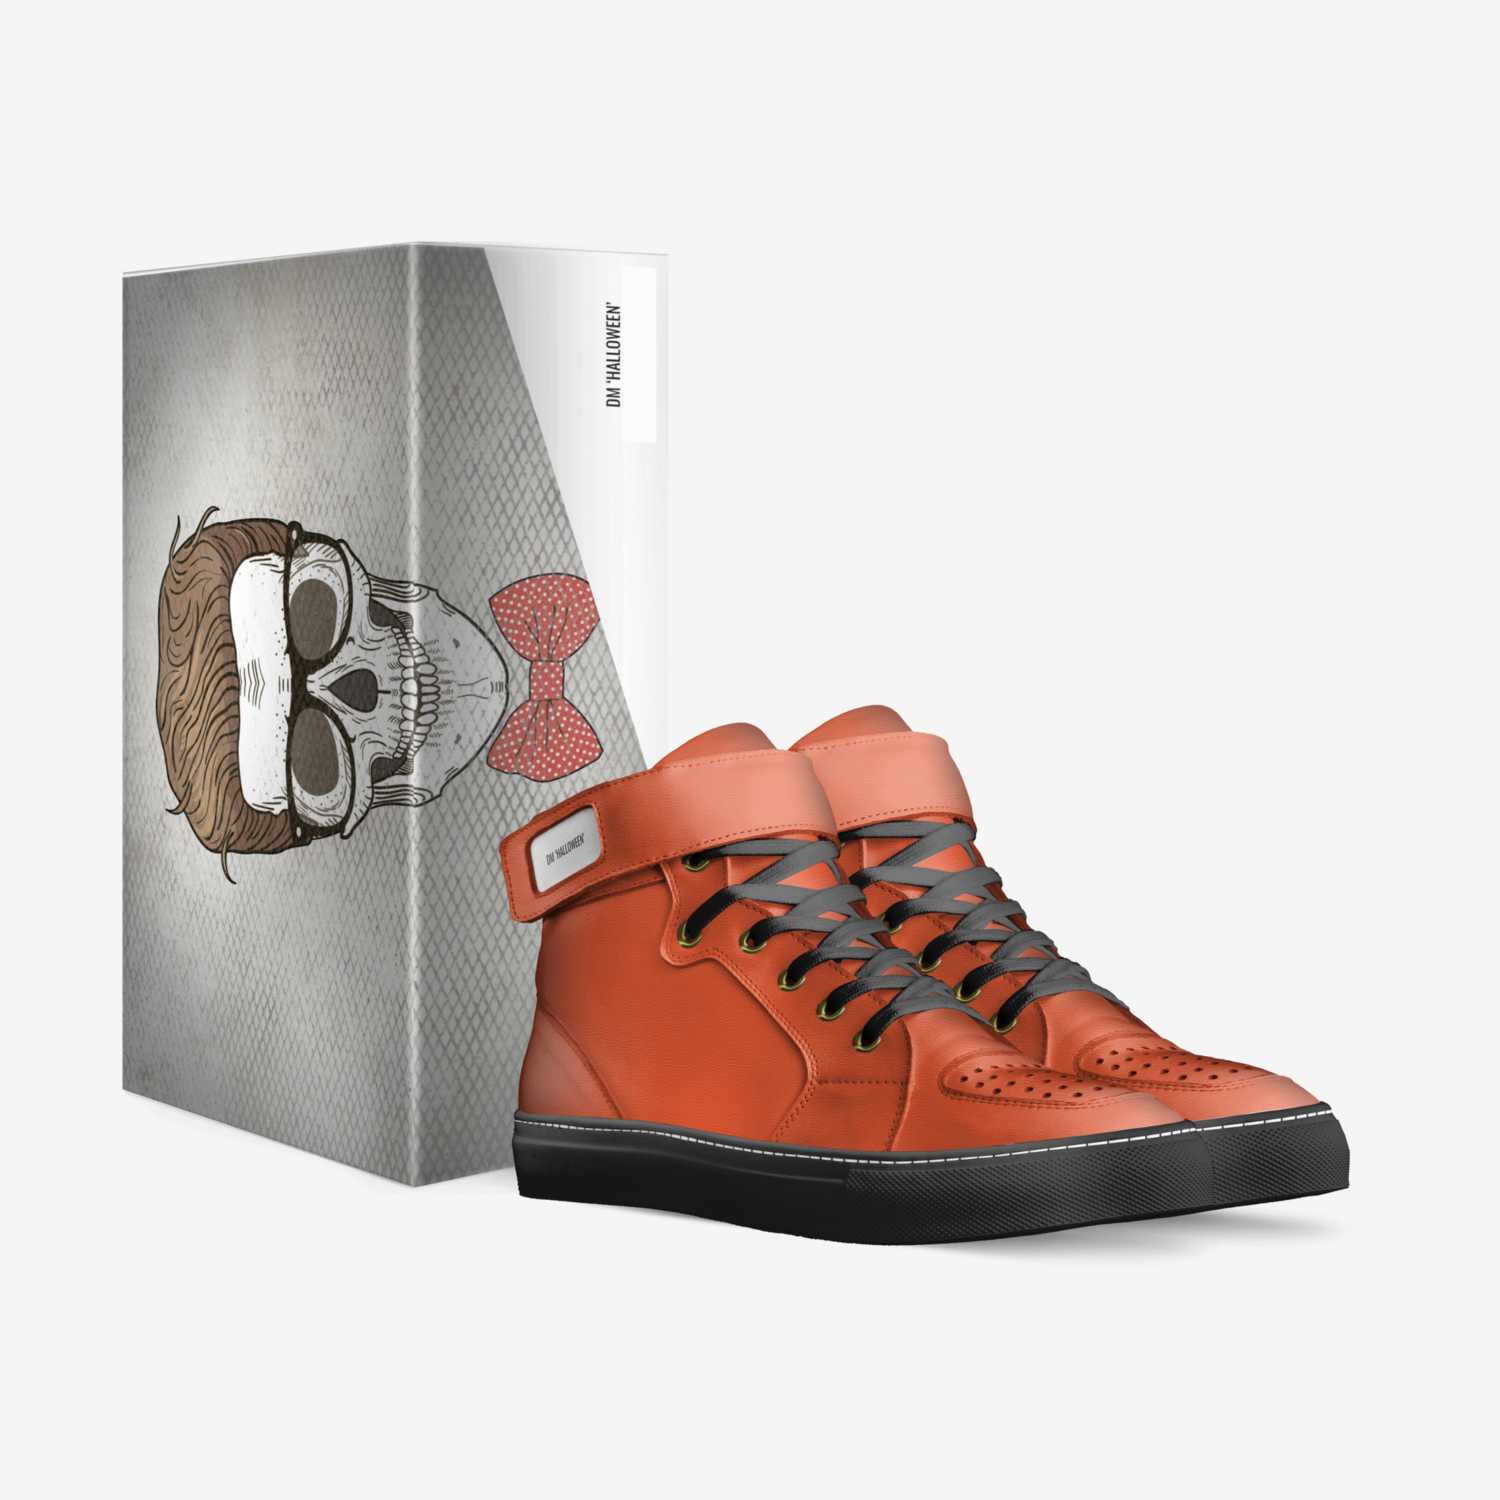 DM ‘halloween’ custom made in Italy shoes by Derek Fire | Box view